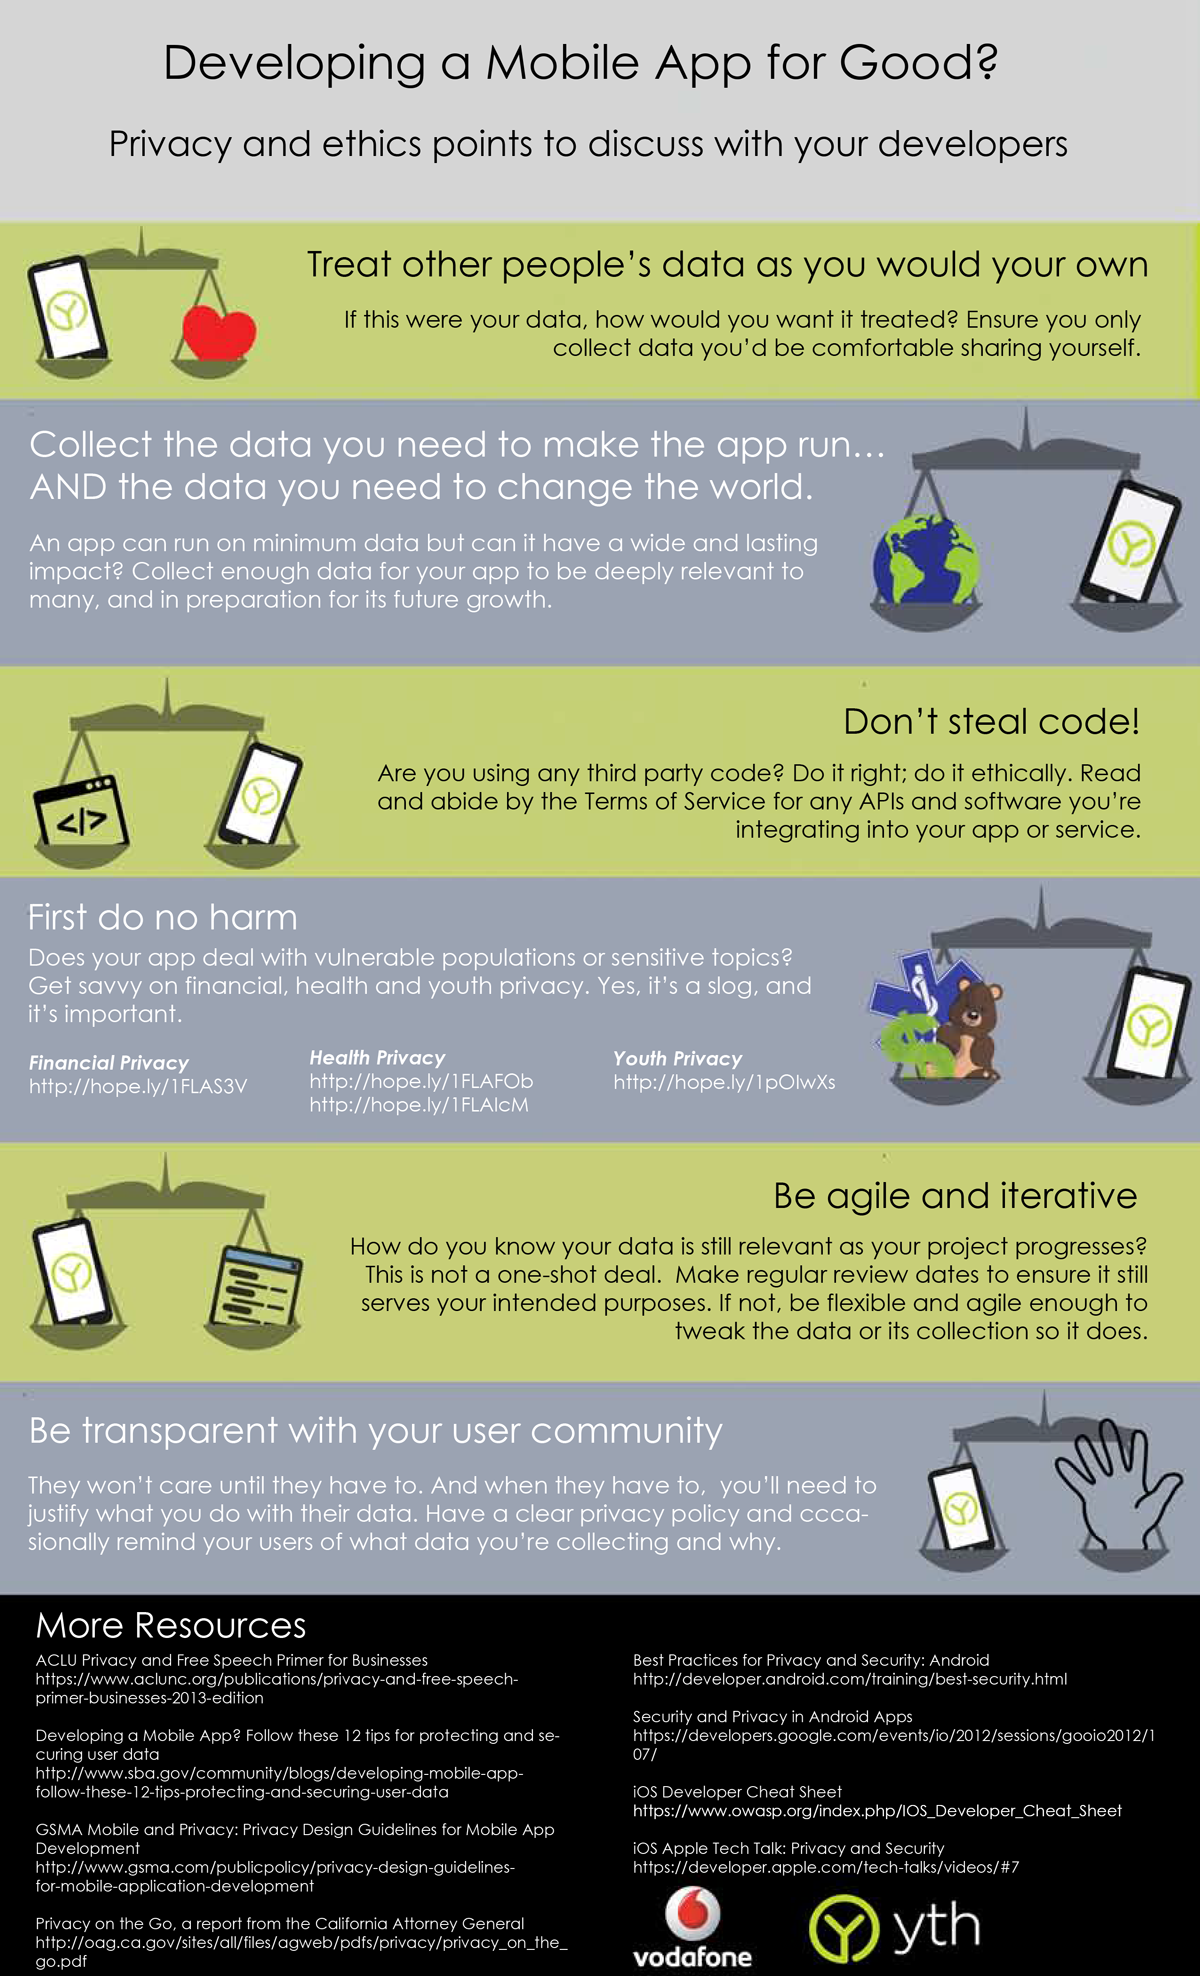 Developing a mobile app for youth privacy infographic